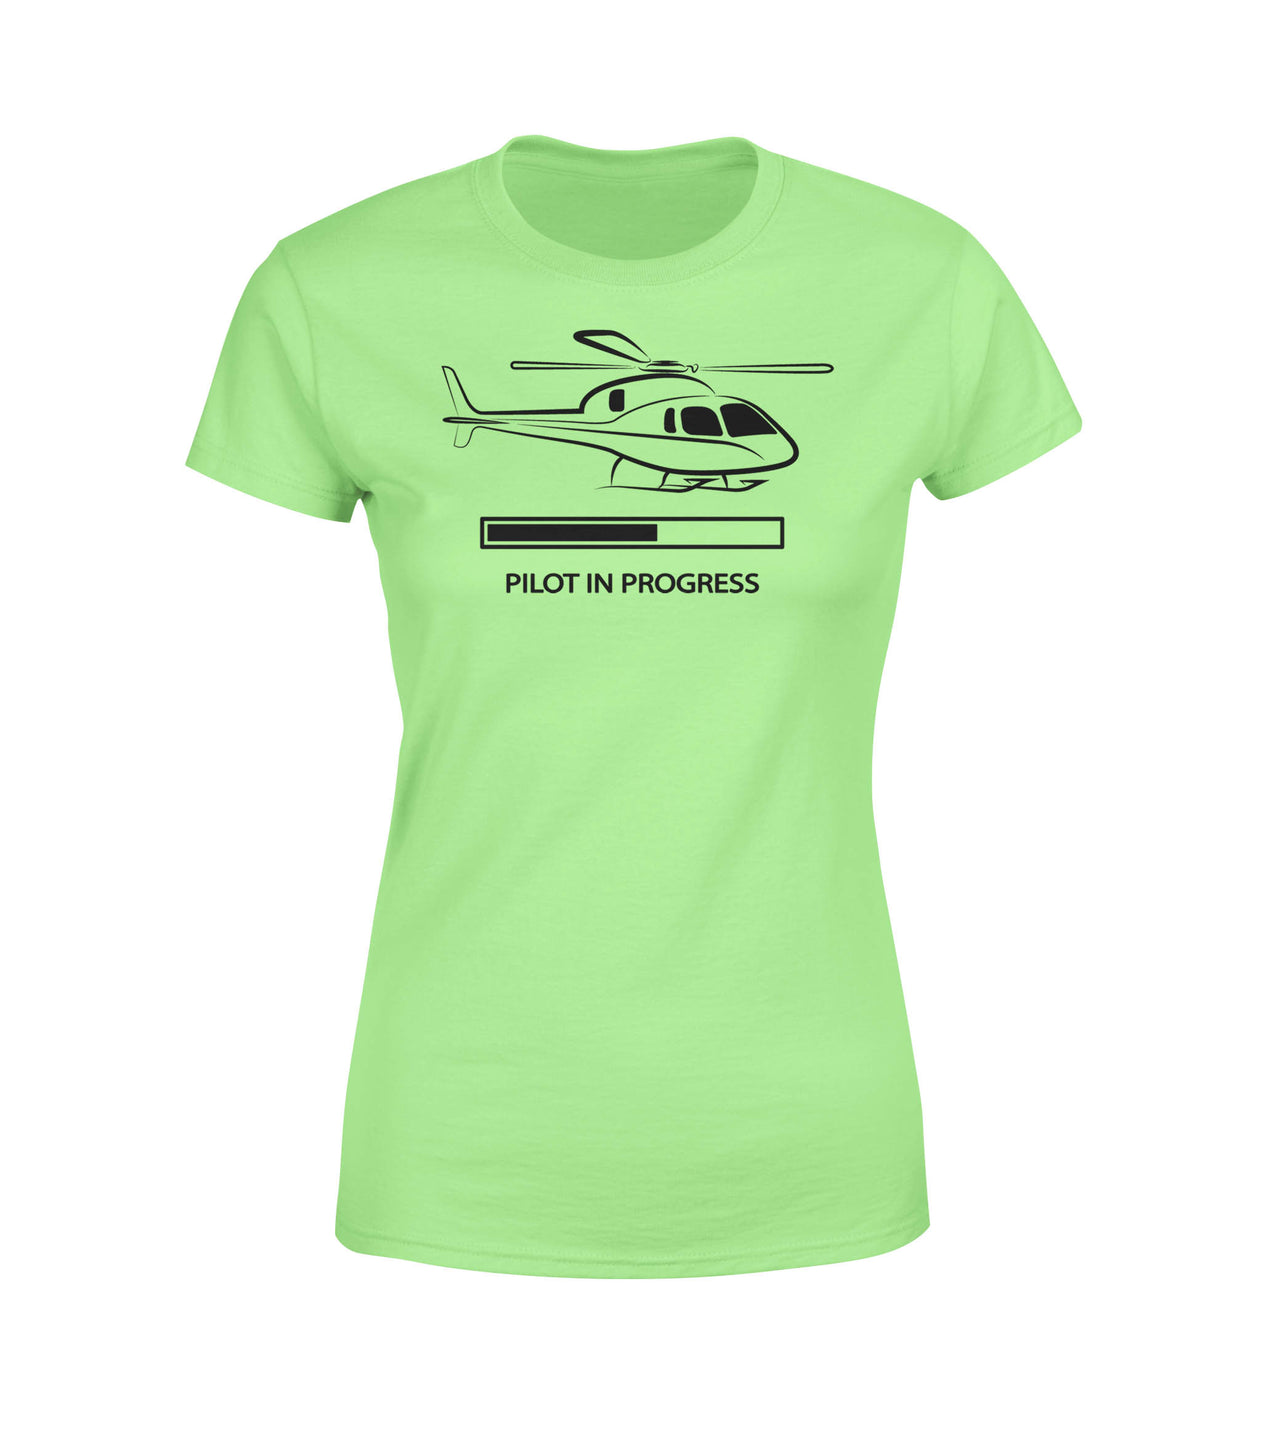 Pilot In Progress (Helicopter) Designed Women T-Shirts